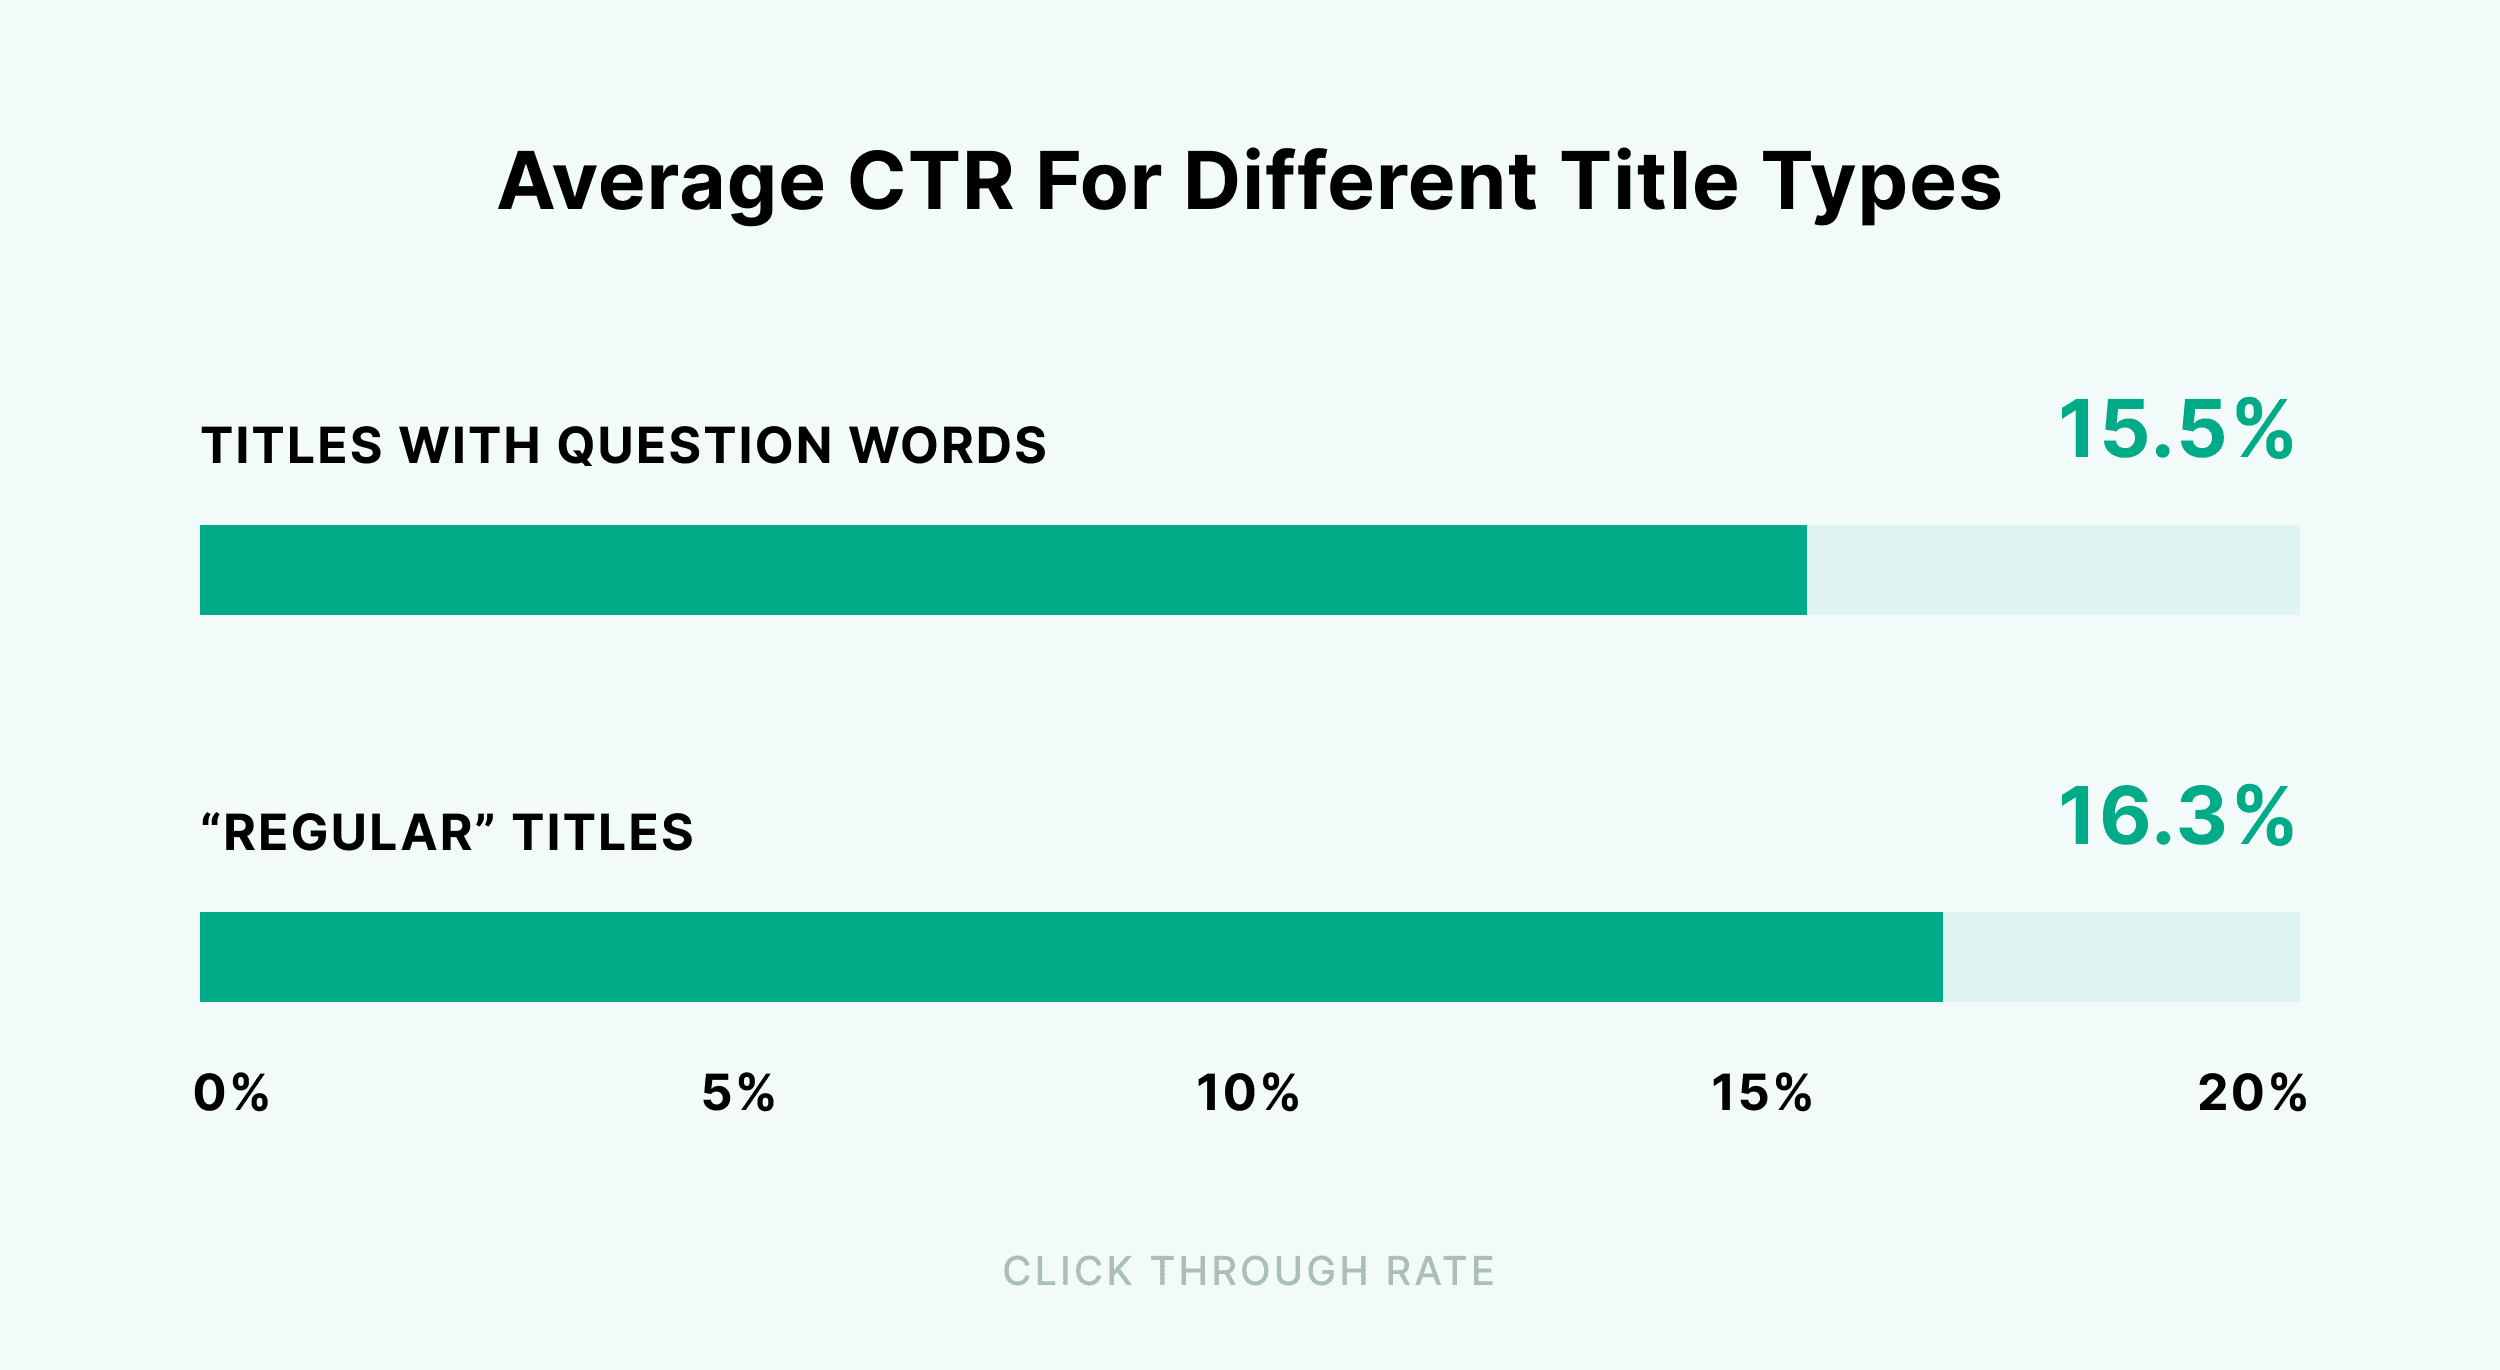 Average CTR for different title types